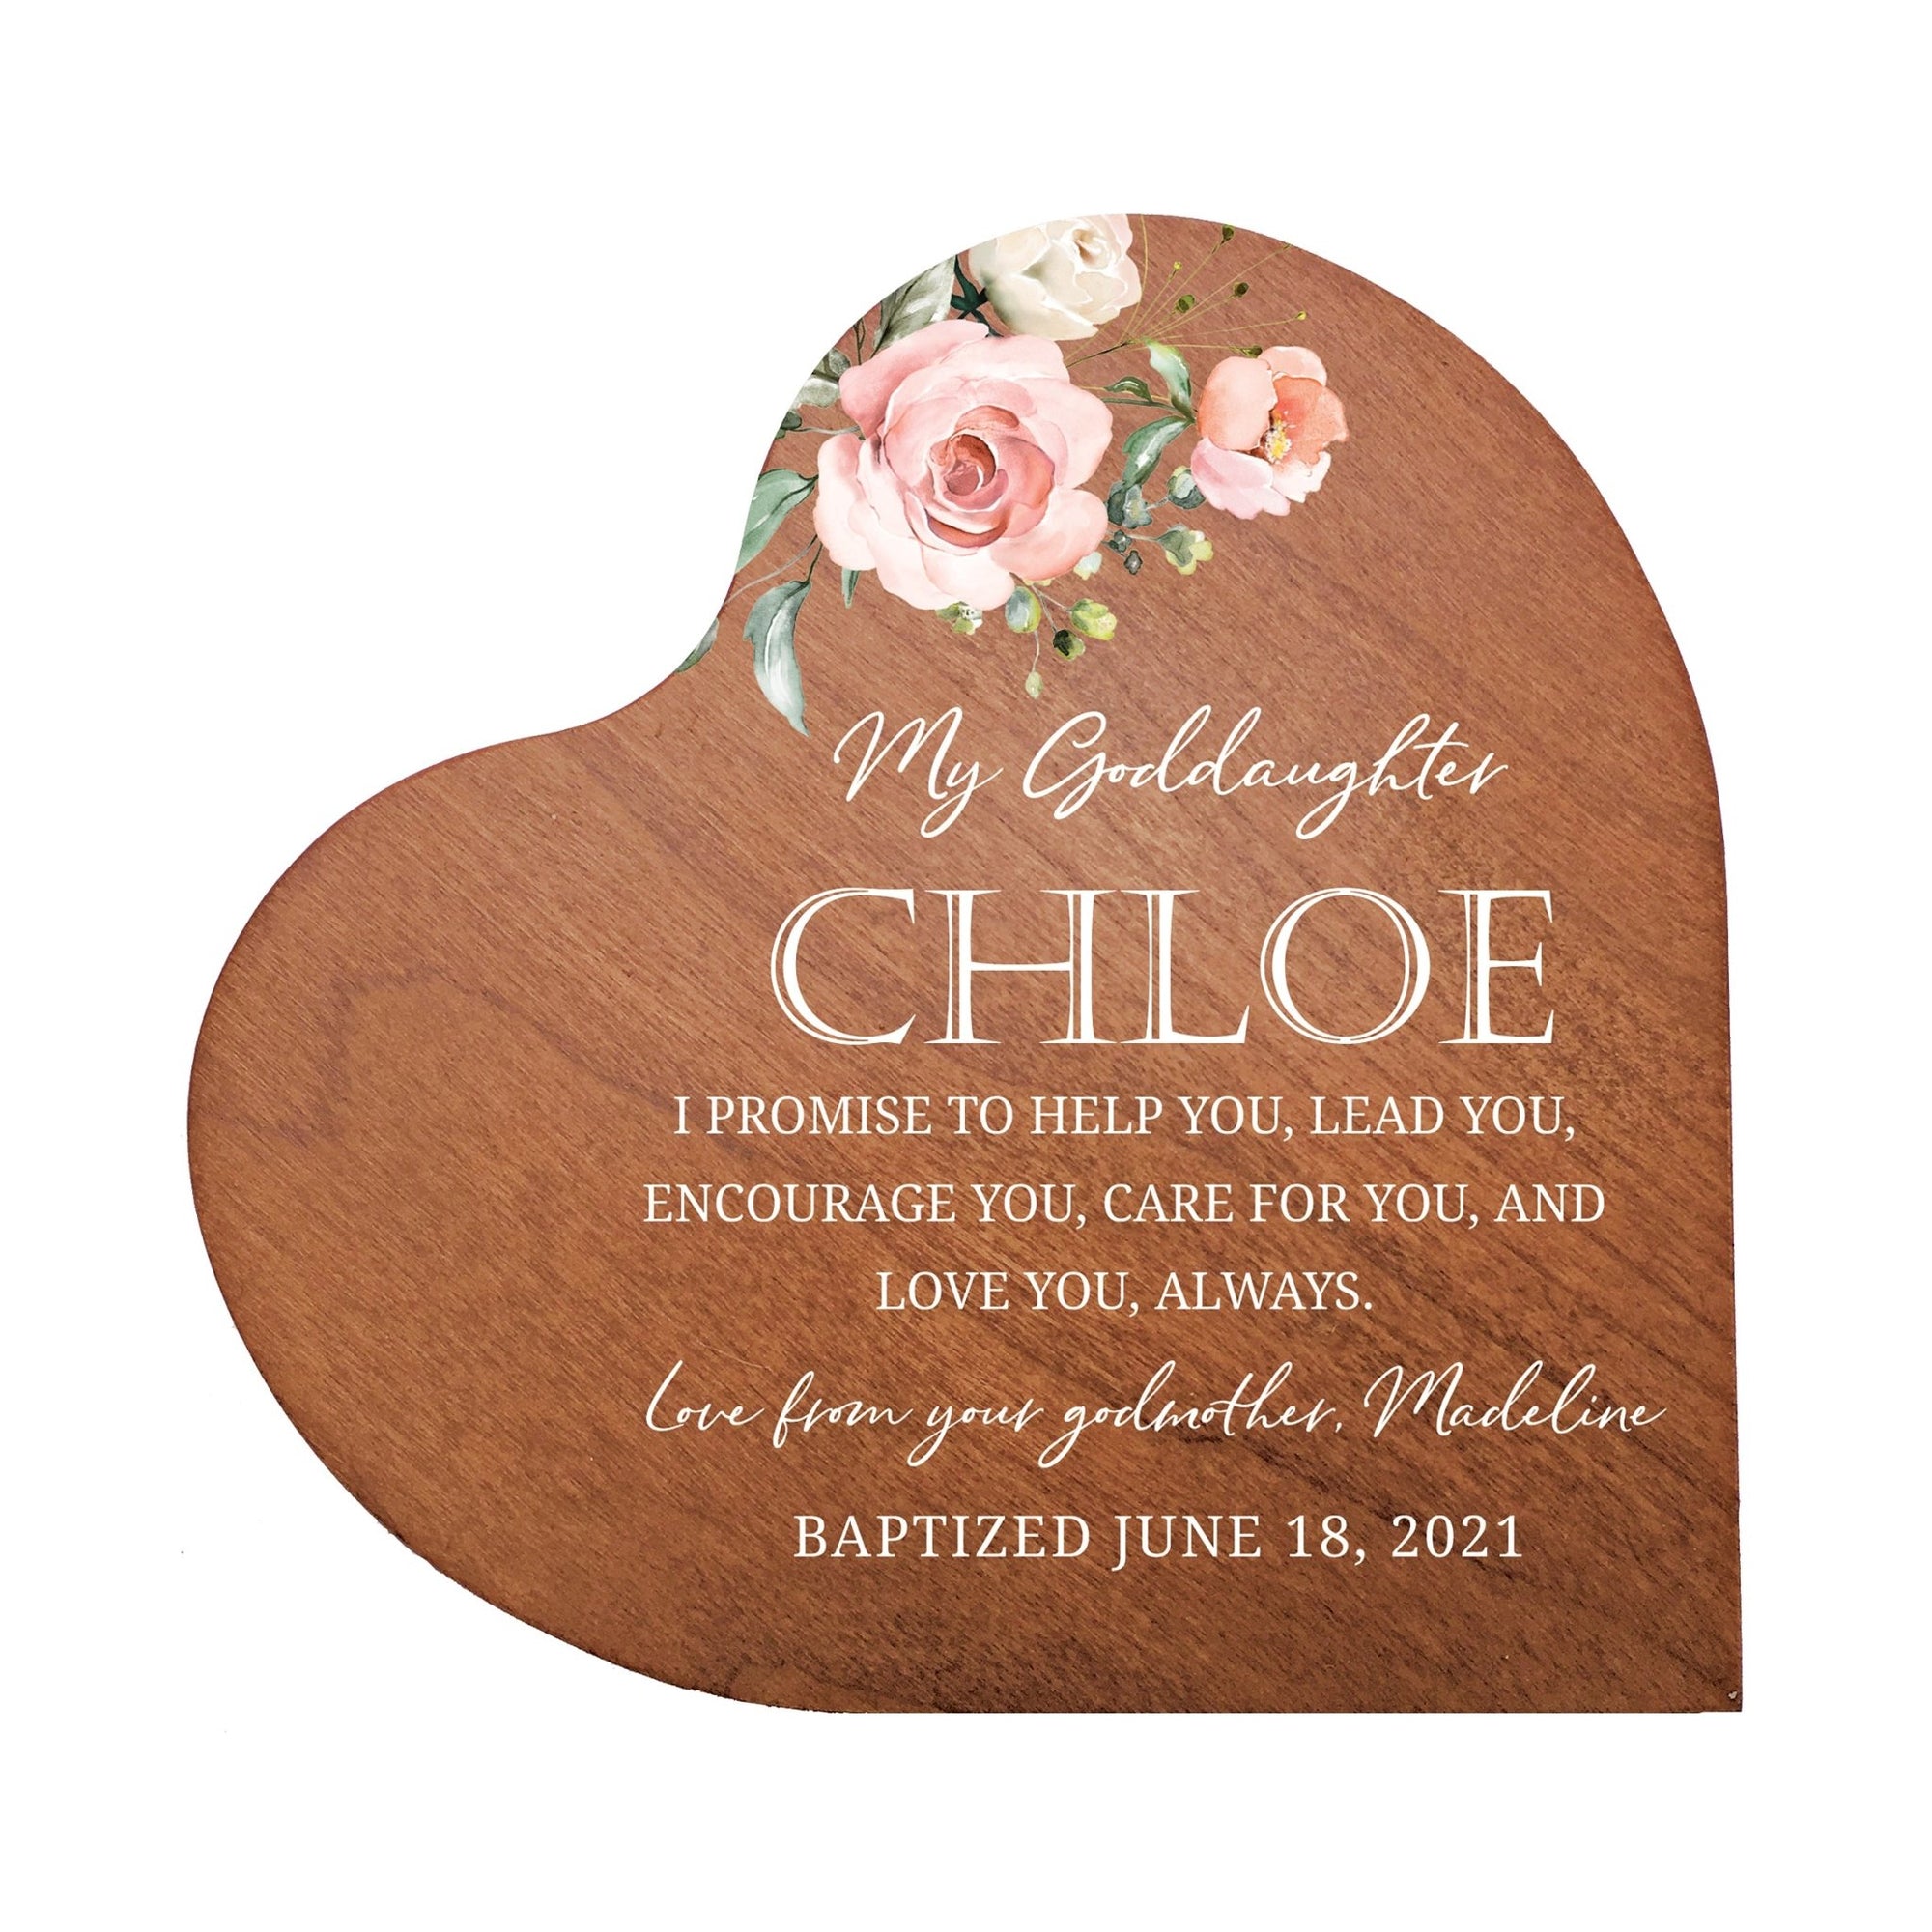 Personalized Baptism Heart Block 5in with Inspirational verse Keepsake Gift for Goddaughter - My Goddaughter - LifeSong Milestones